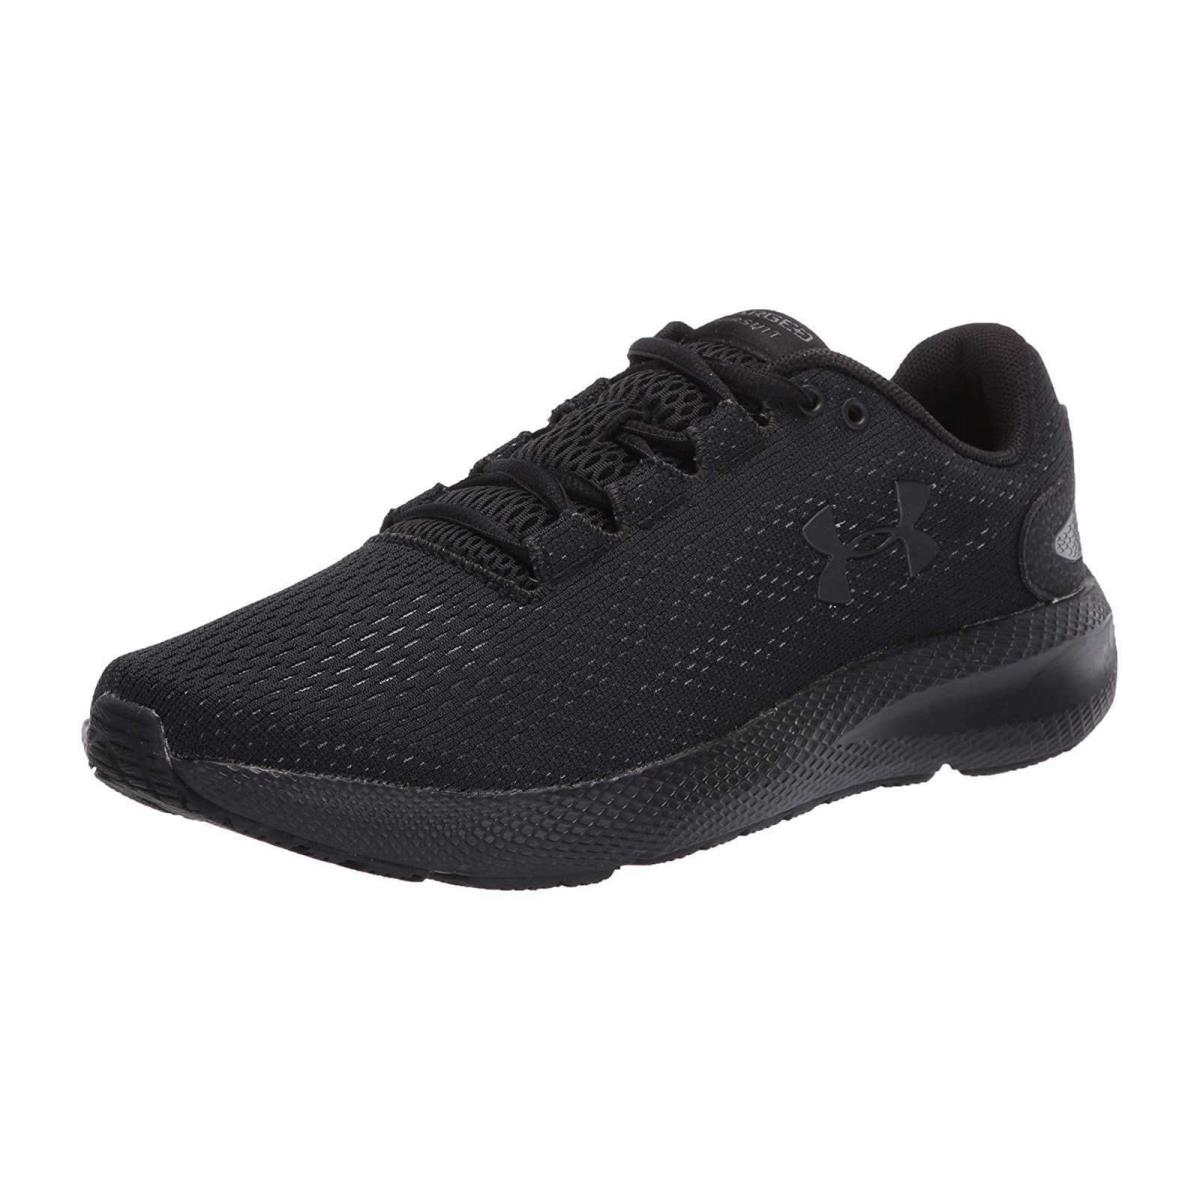 Under Armour Mens Athletic Sneakers Charged Pursuit 2 Running Lace-up Shoes